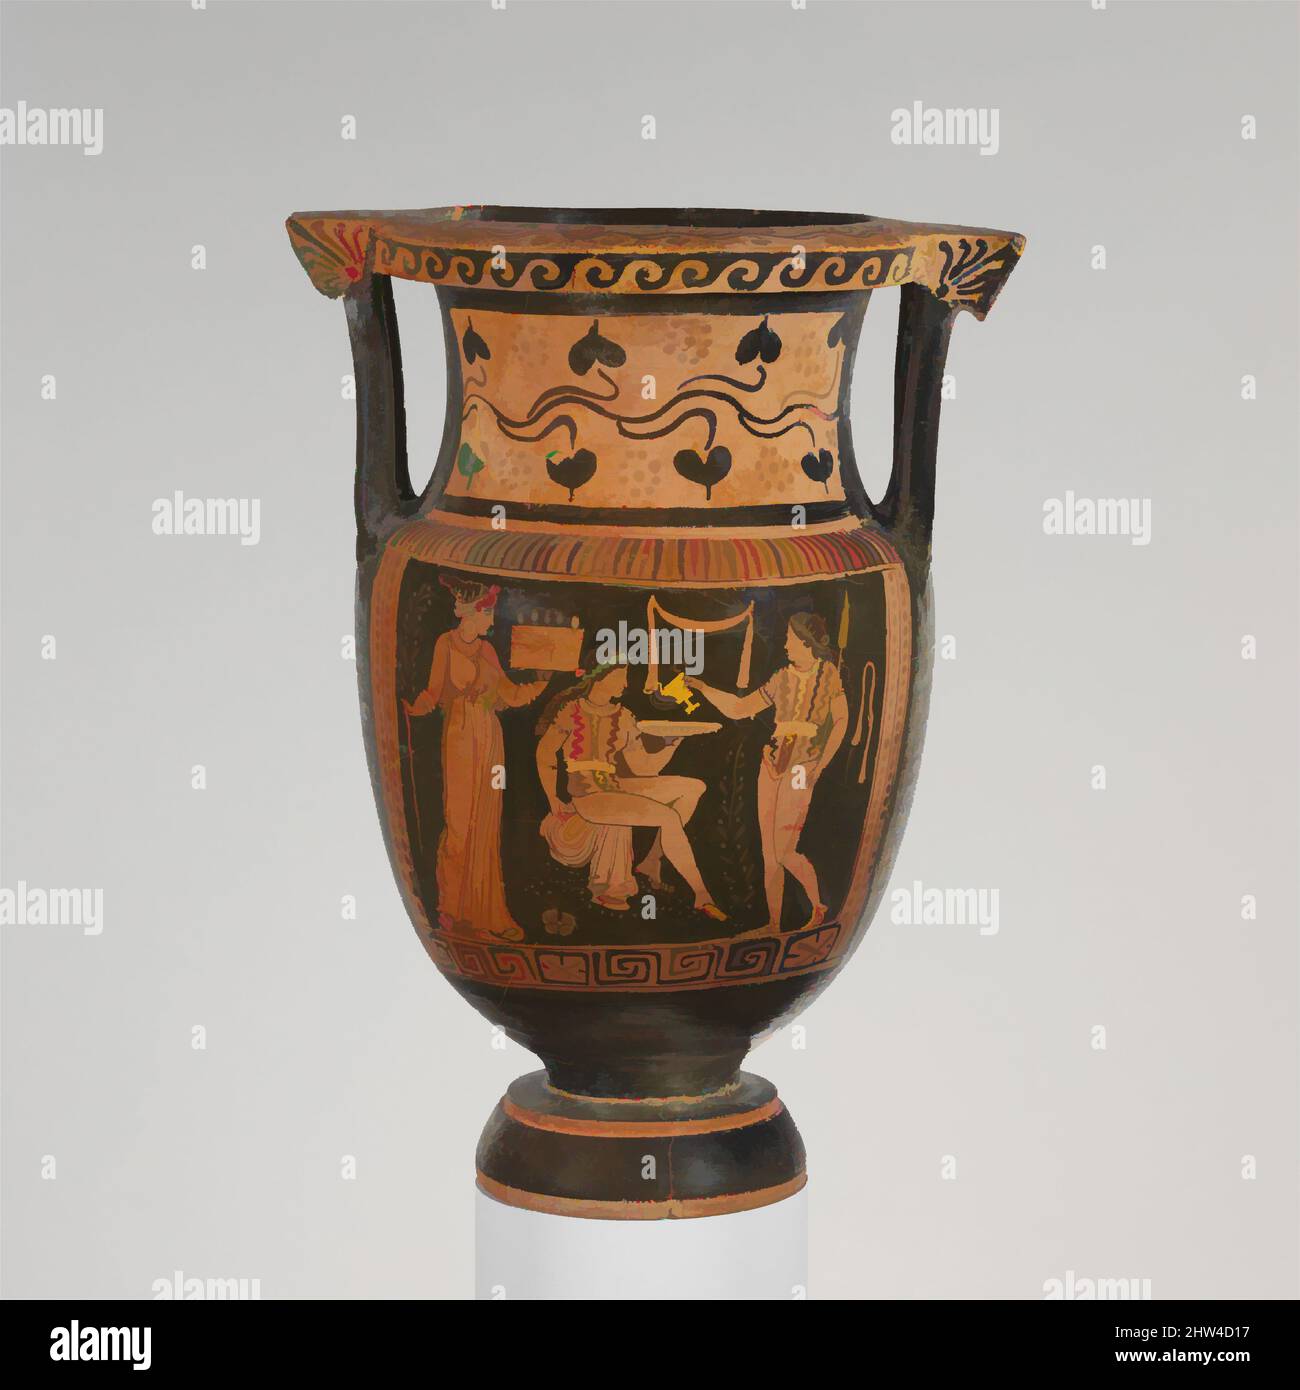 Art inspired by Terracotta column-krater (mixing bowl), Late Classical, 4th century B.C., Greek, South Italian, Apulian, Terracotta; red-figure, H. 21 9/16 in. (54.8 cm), Vases, Obverse, women and two youths in Oscan dress. Reverse, three youths, Classic works modernized by Artotop with a splash of modernity. Shapes, color and value, eye-catching visual impact on art. Emotions through freedom of artworks in a contemporary way. A timeless message pursuing a wildly creative new direction. Artists turning to the digital medium and creating the Artotop NFT Stock Photo